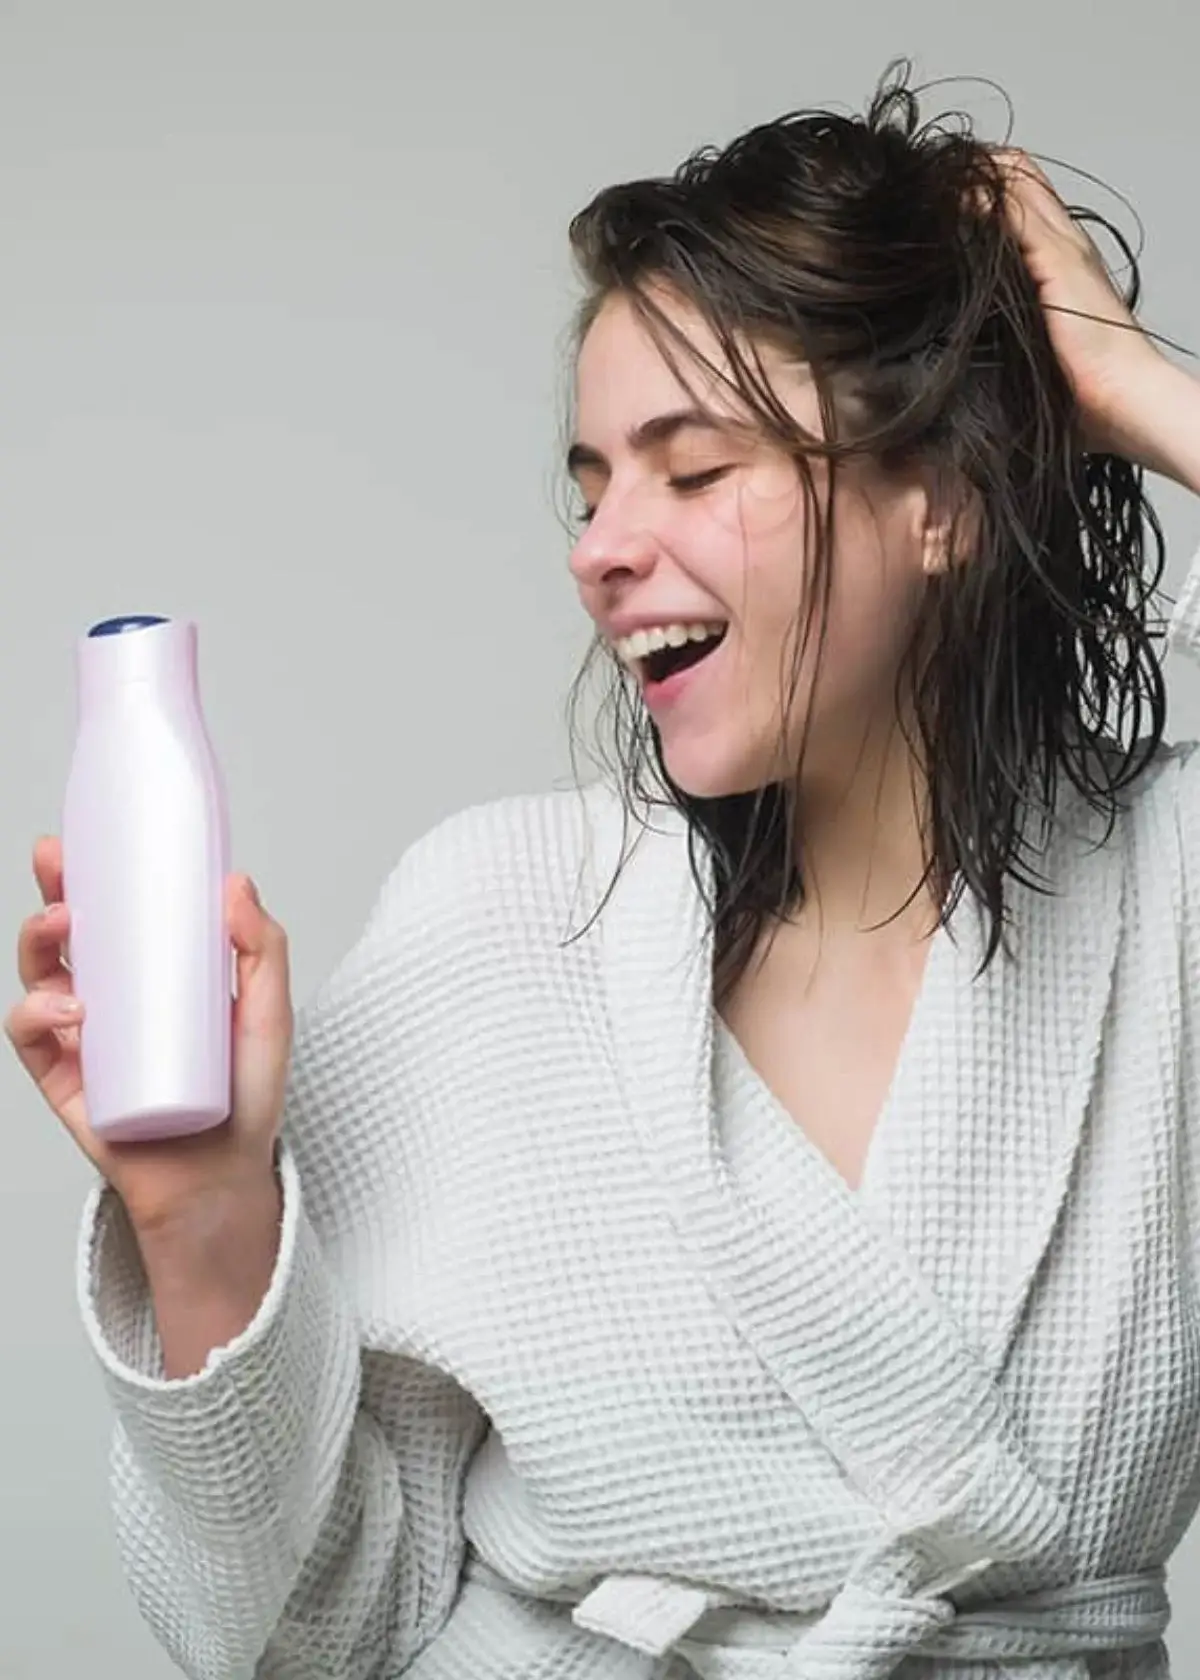 Does fragrance-free shampoo still effectively cleanse the hair?